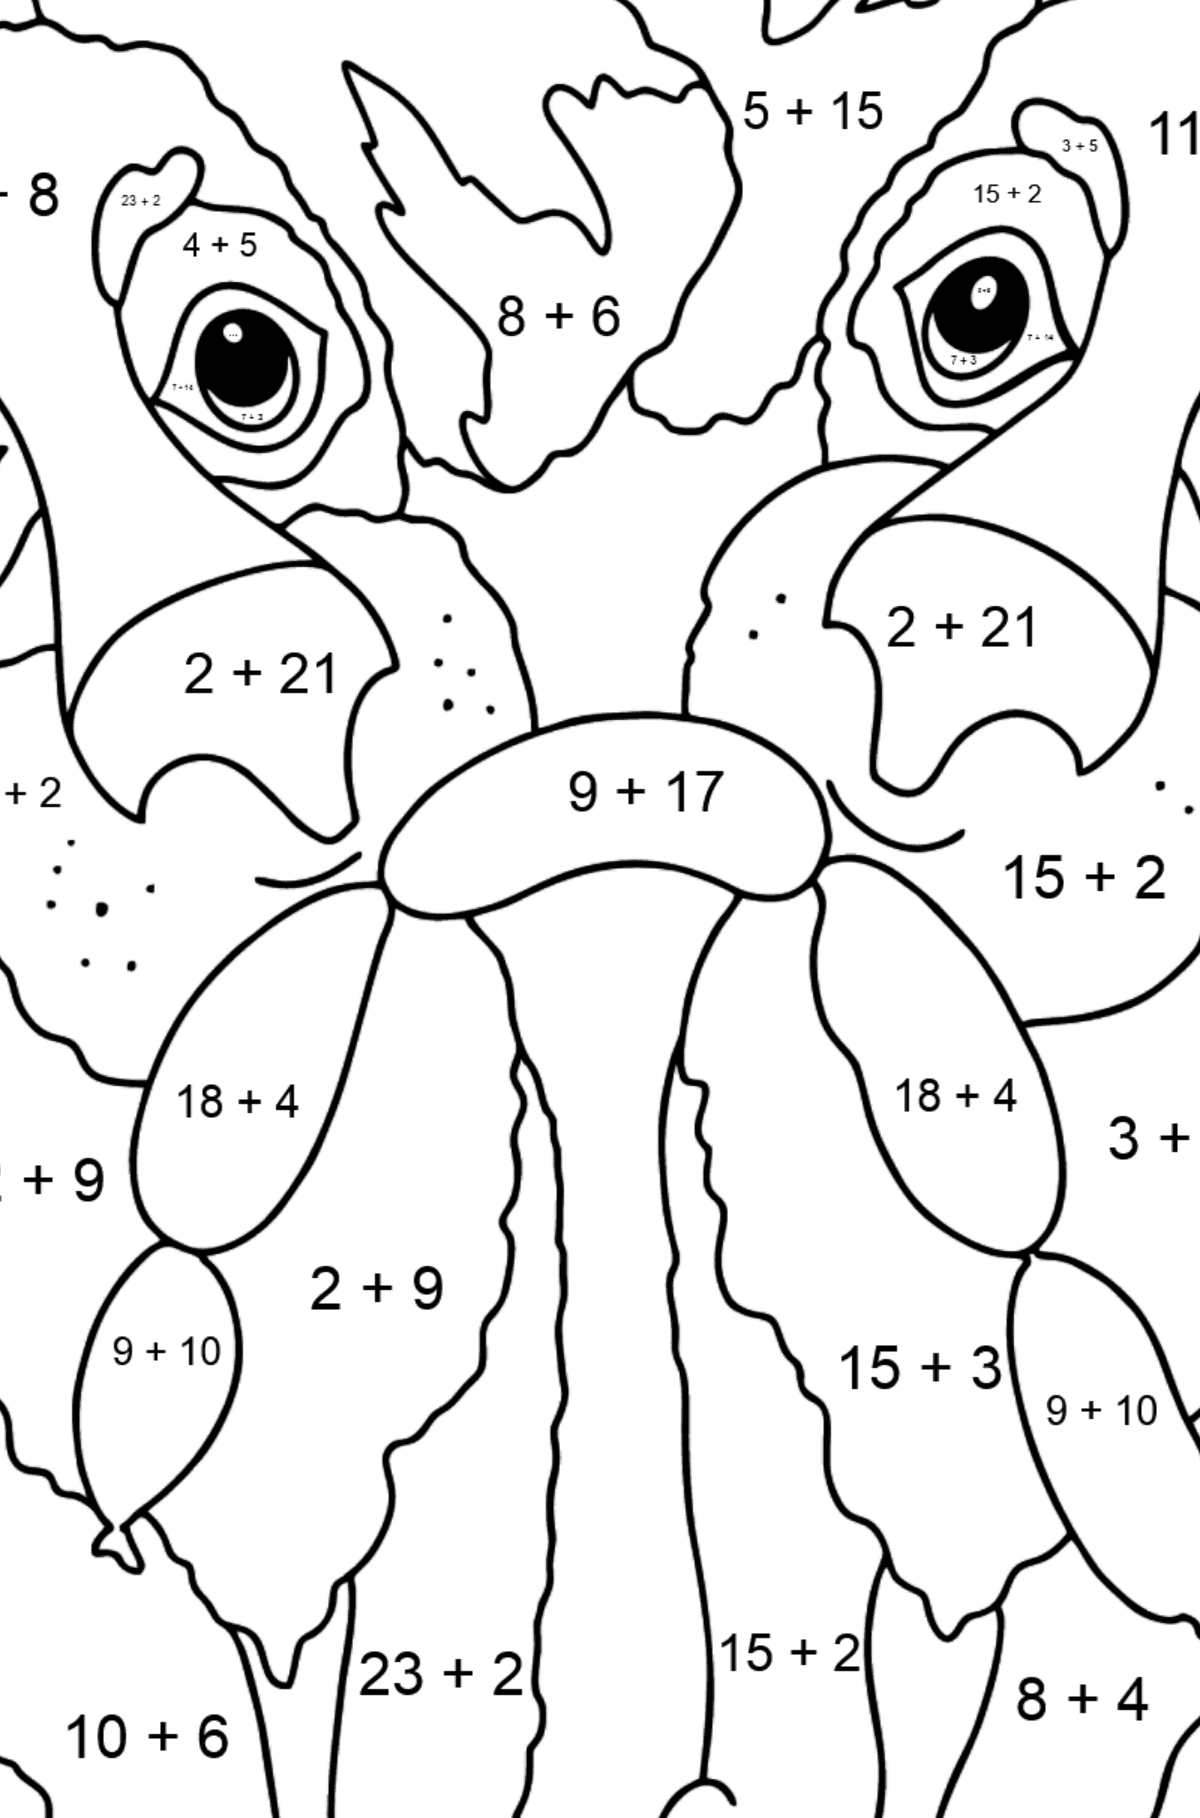 Coloring Page - Dogs Found Sausages - Math Coloring - Addition for Kids